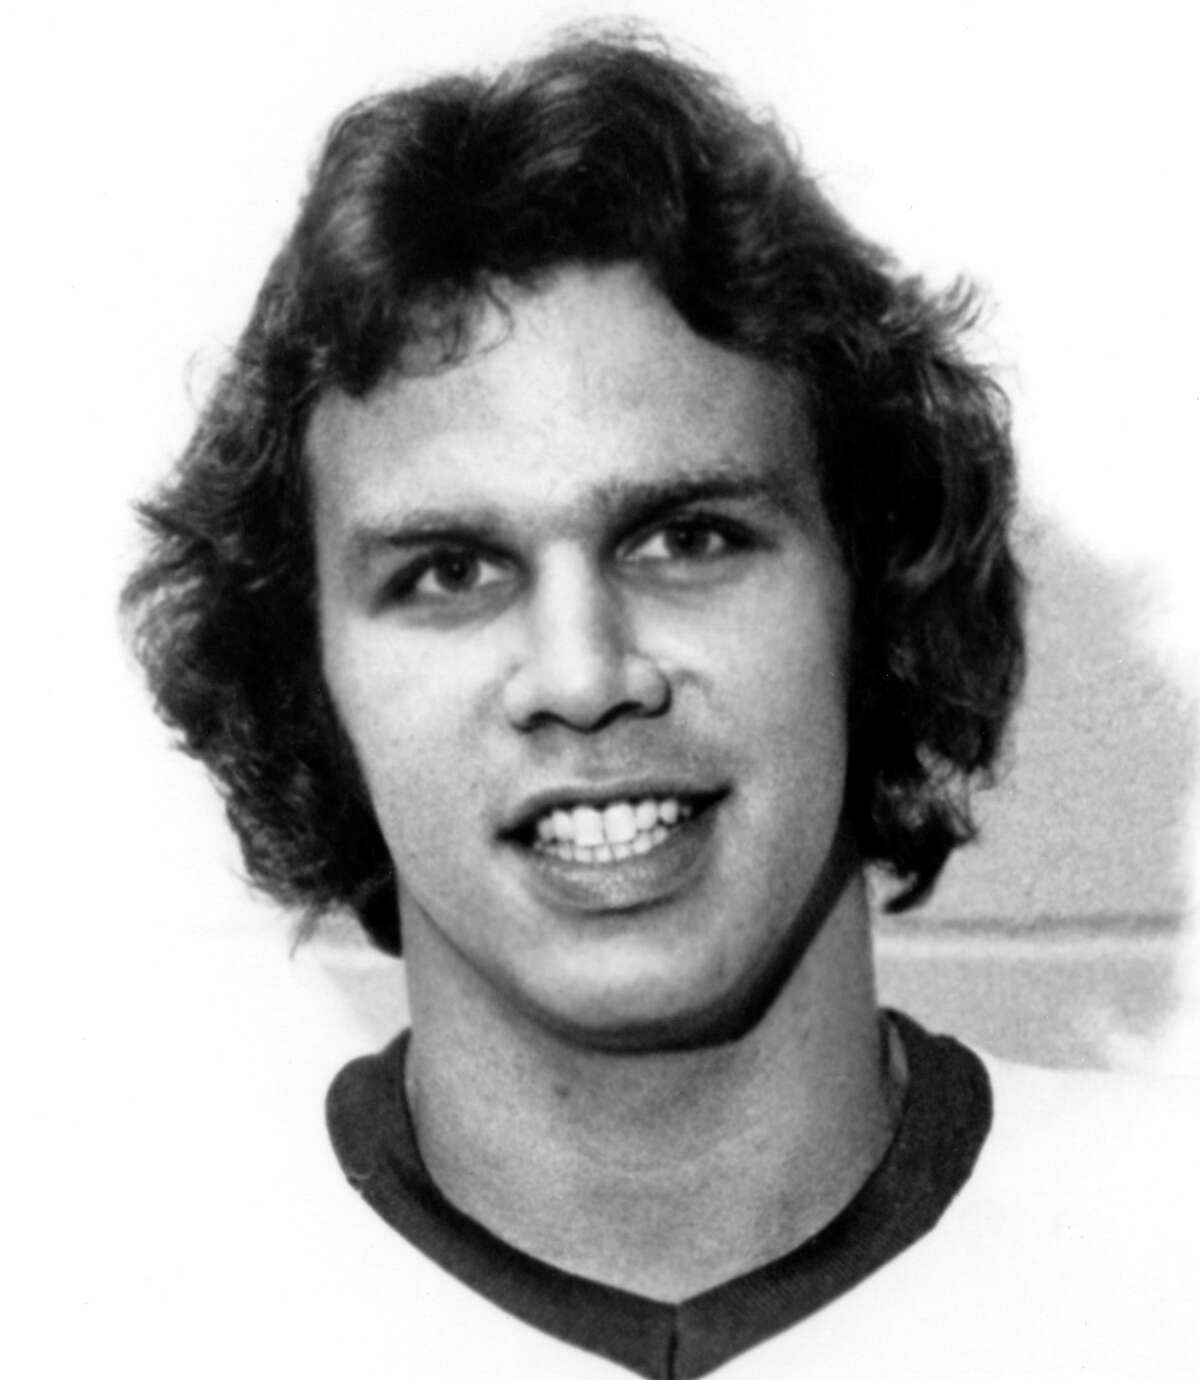 CAM CONNOR, 1979 The forward played two seasons with the WHA Aeros before joining the Montreal Canadiens for the 1978-79 season. He played 23 regular-season games and eight playoff matches as the Canadiens won their fourth consecutive Stanley Cup to close the decade.